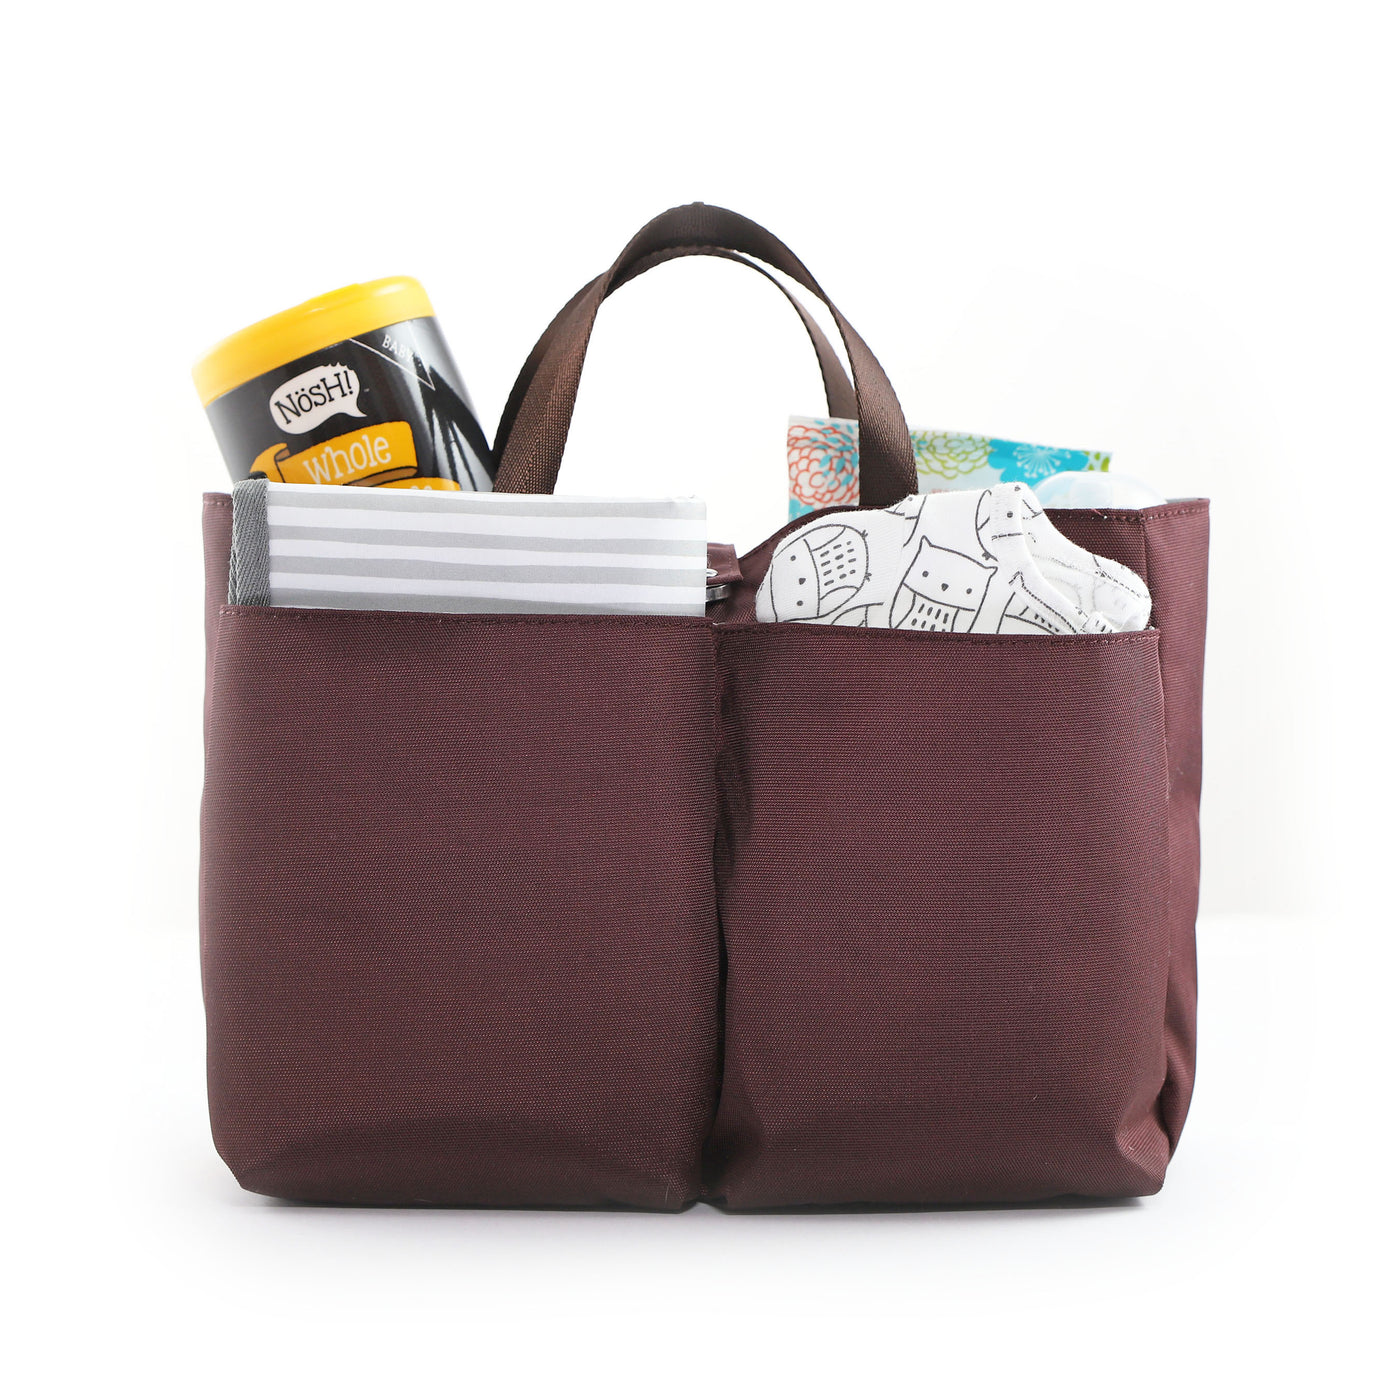 Burgundy organizer bag with 2 carry handles, shown packed with baby items, diapers, changing mat and snack container.